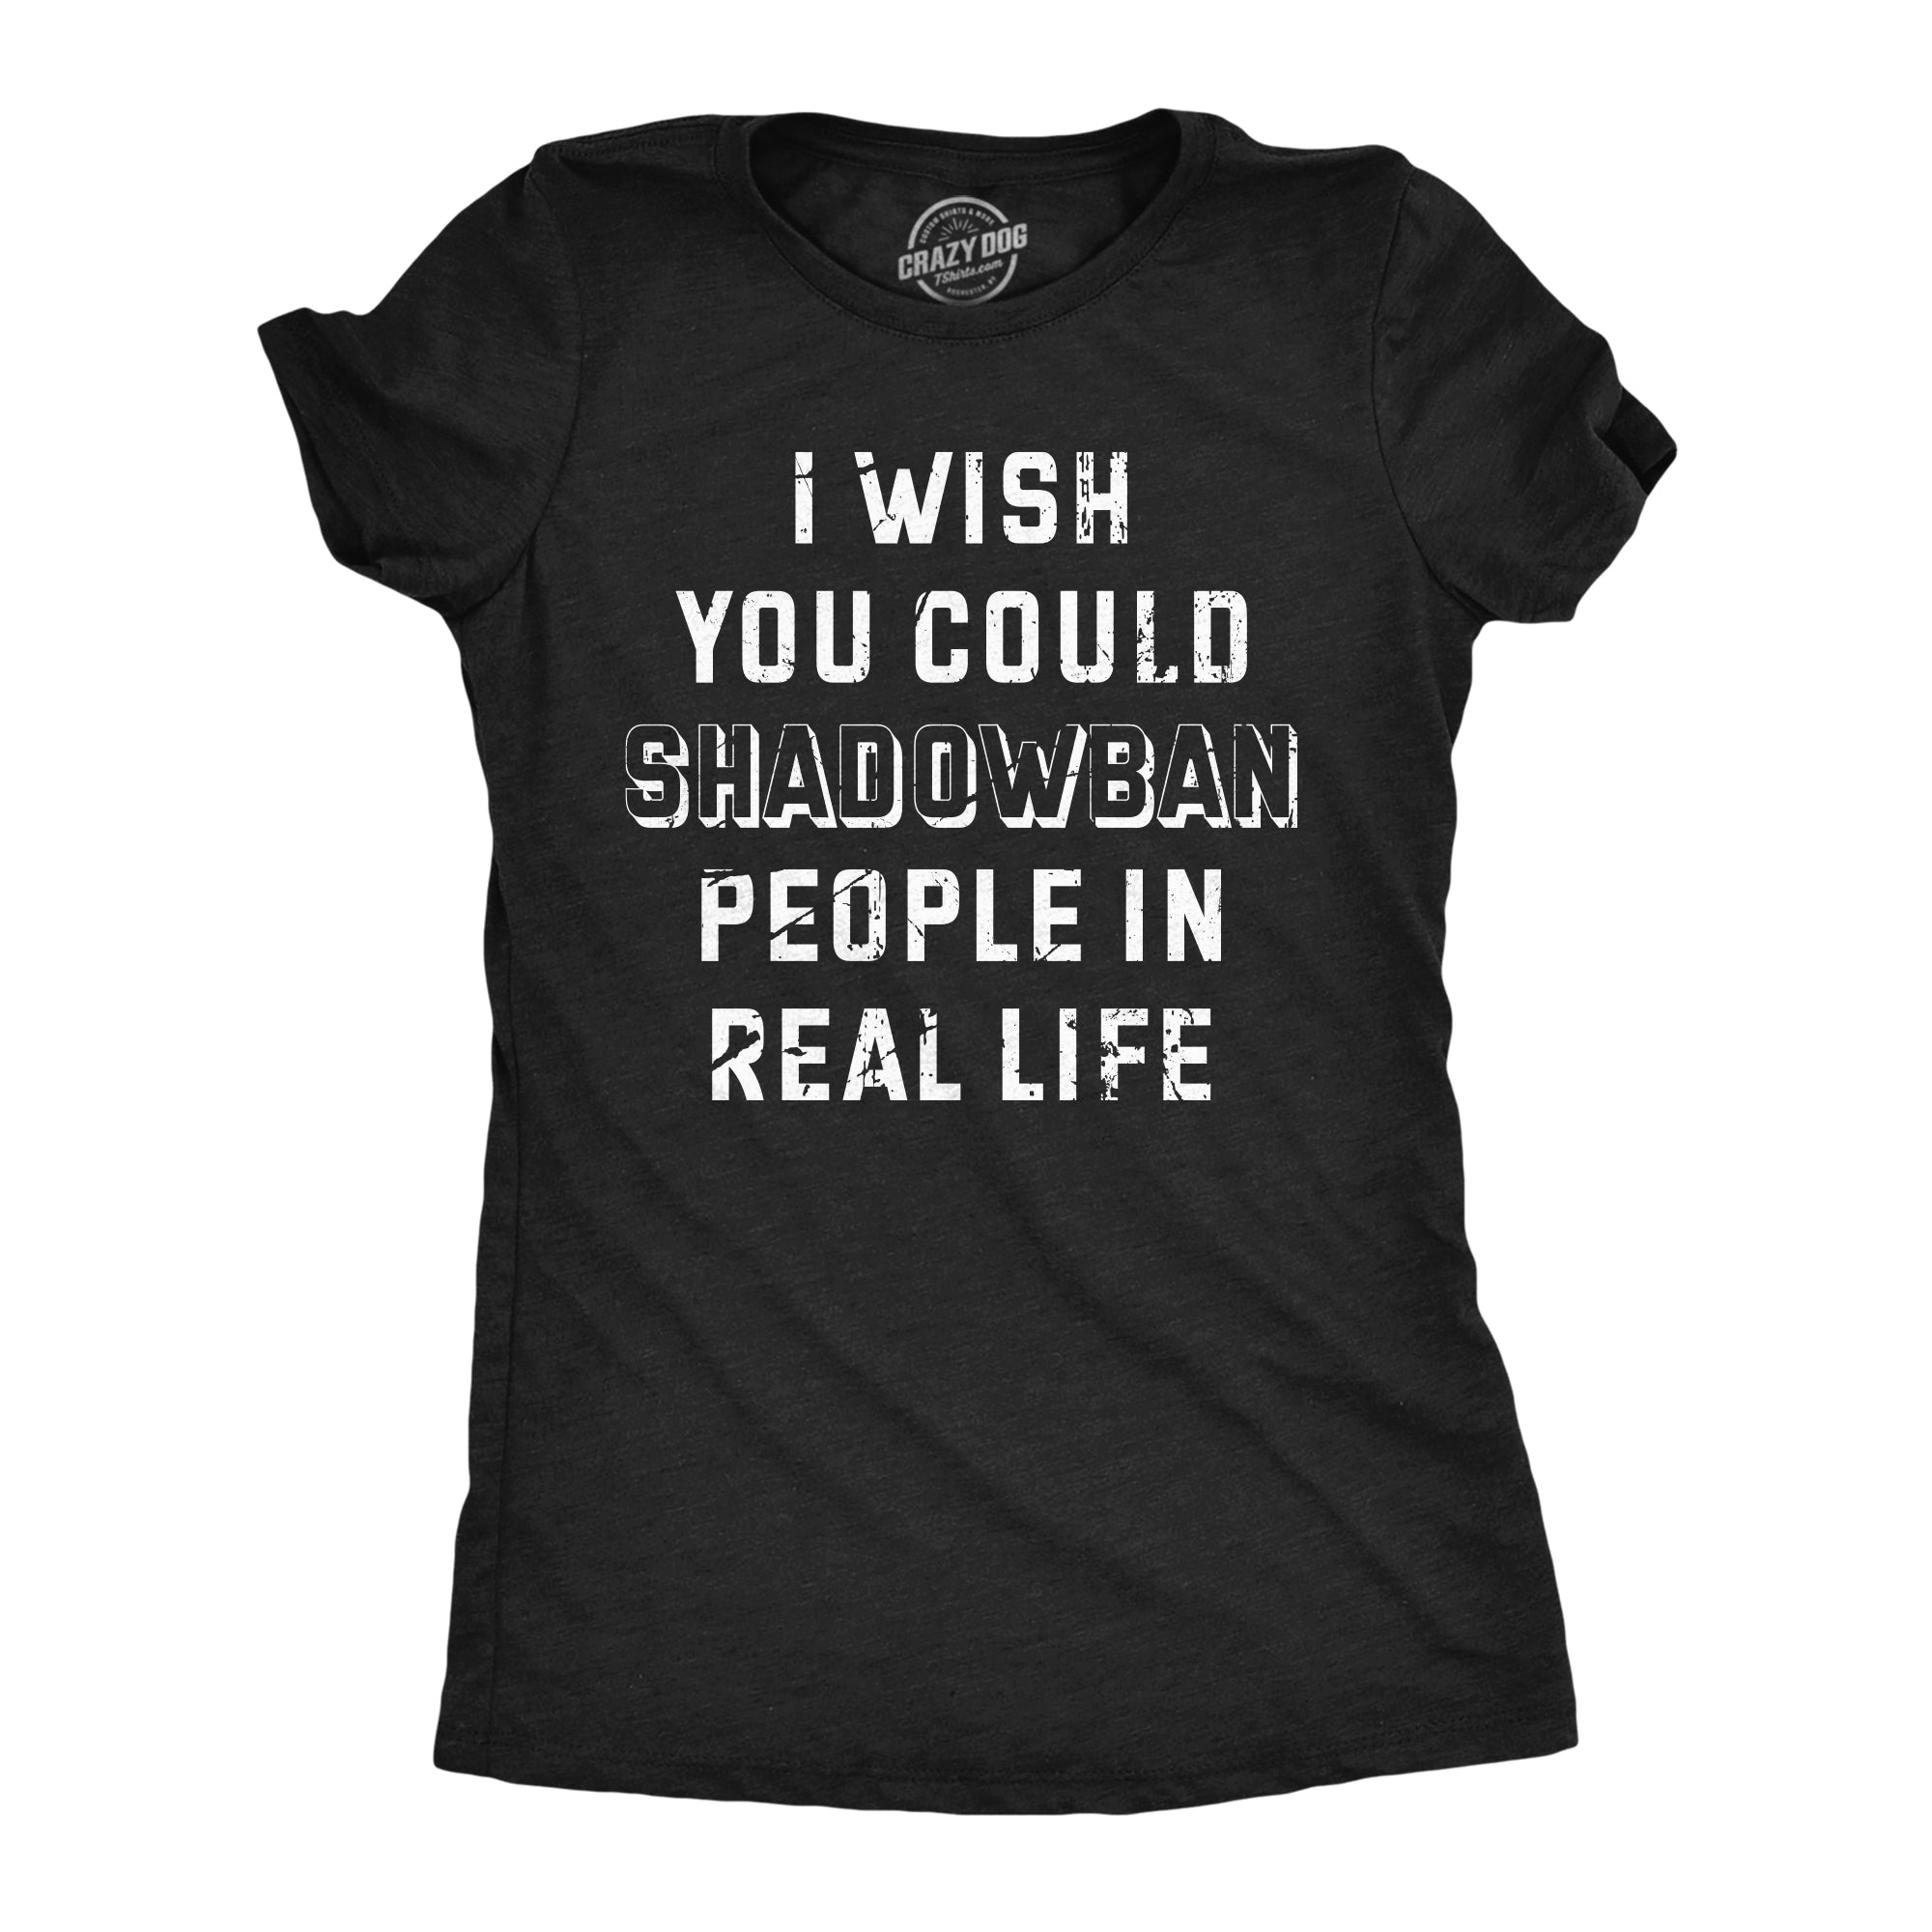 Funny Heather Black - Shadowban People In Real Life I Wish I Could Shadow Ban Peolple In Real Life Womens T Shirt Nerdy Sarcastic Tee